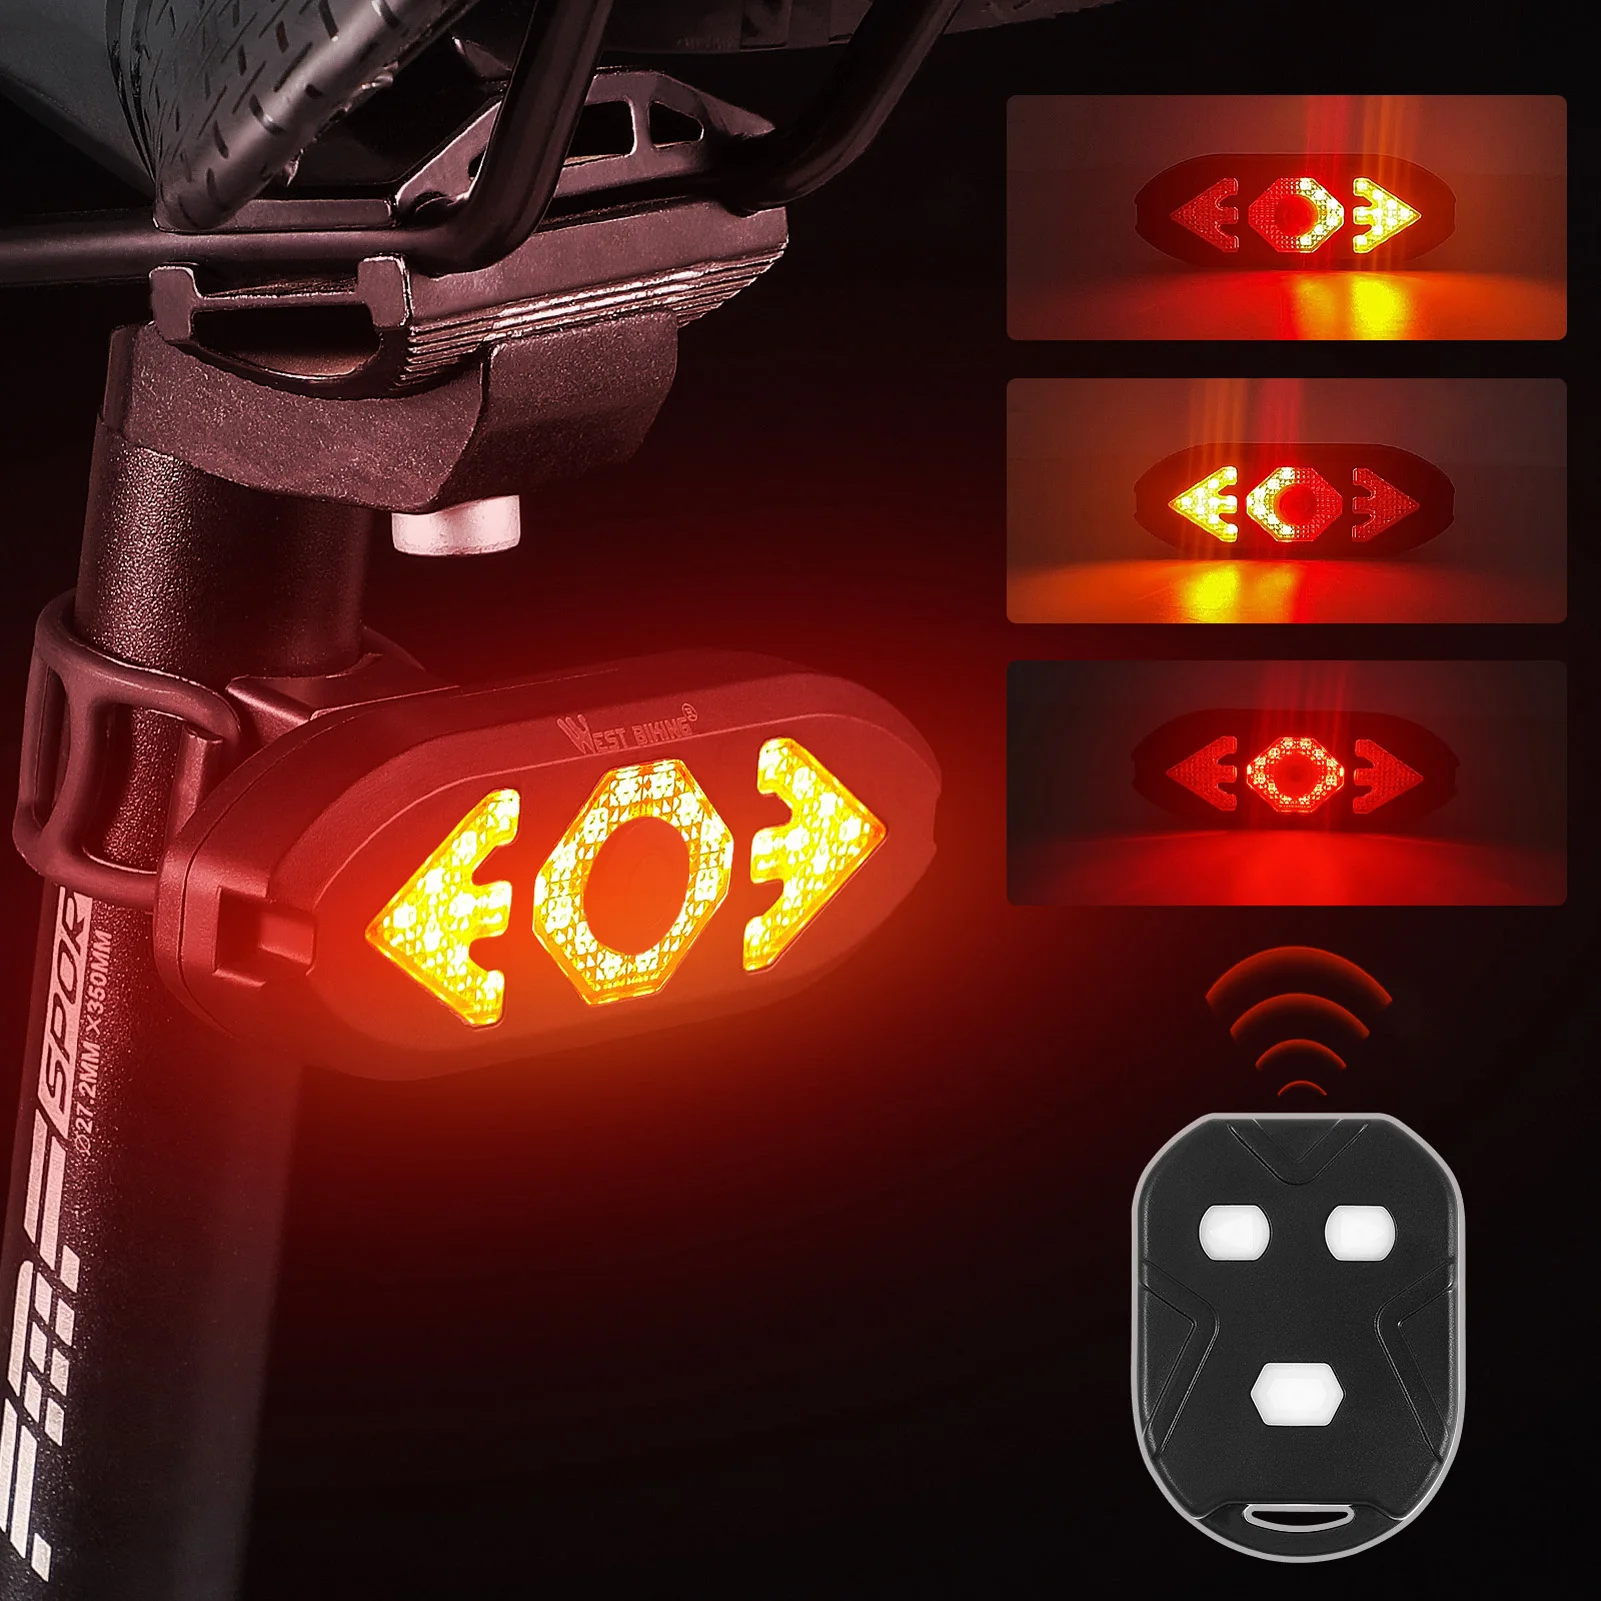 Ght rear light bike taillight bicycle turn signal light with horn bike accessories rear thumb200